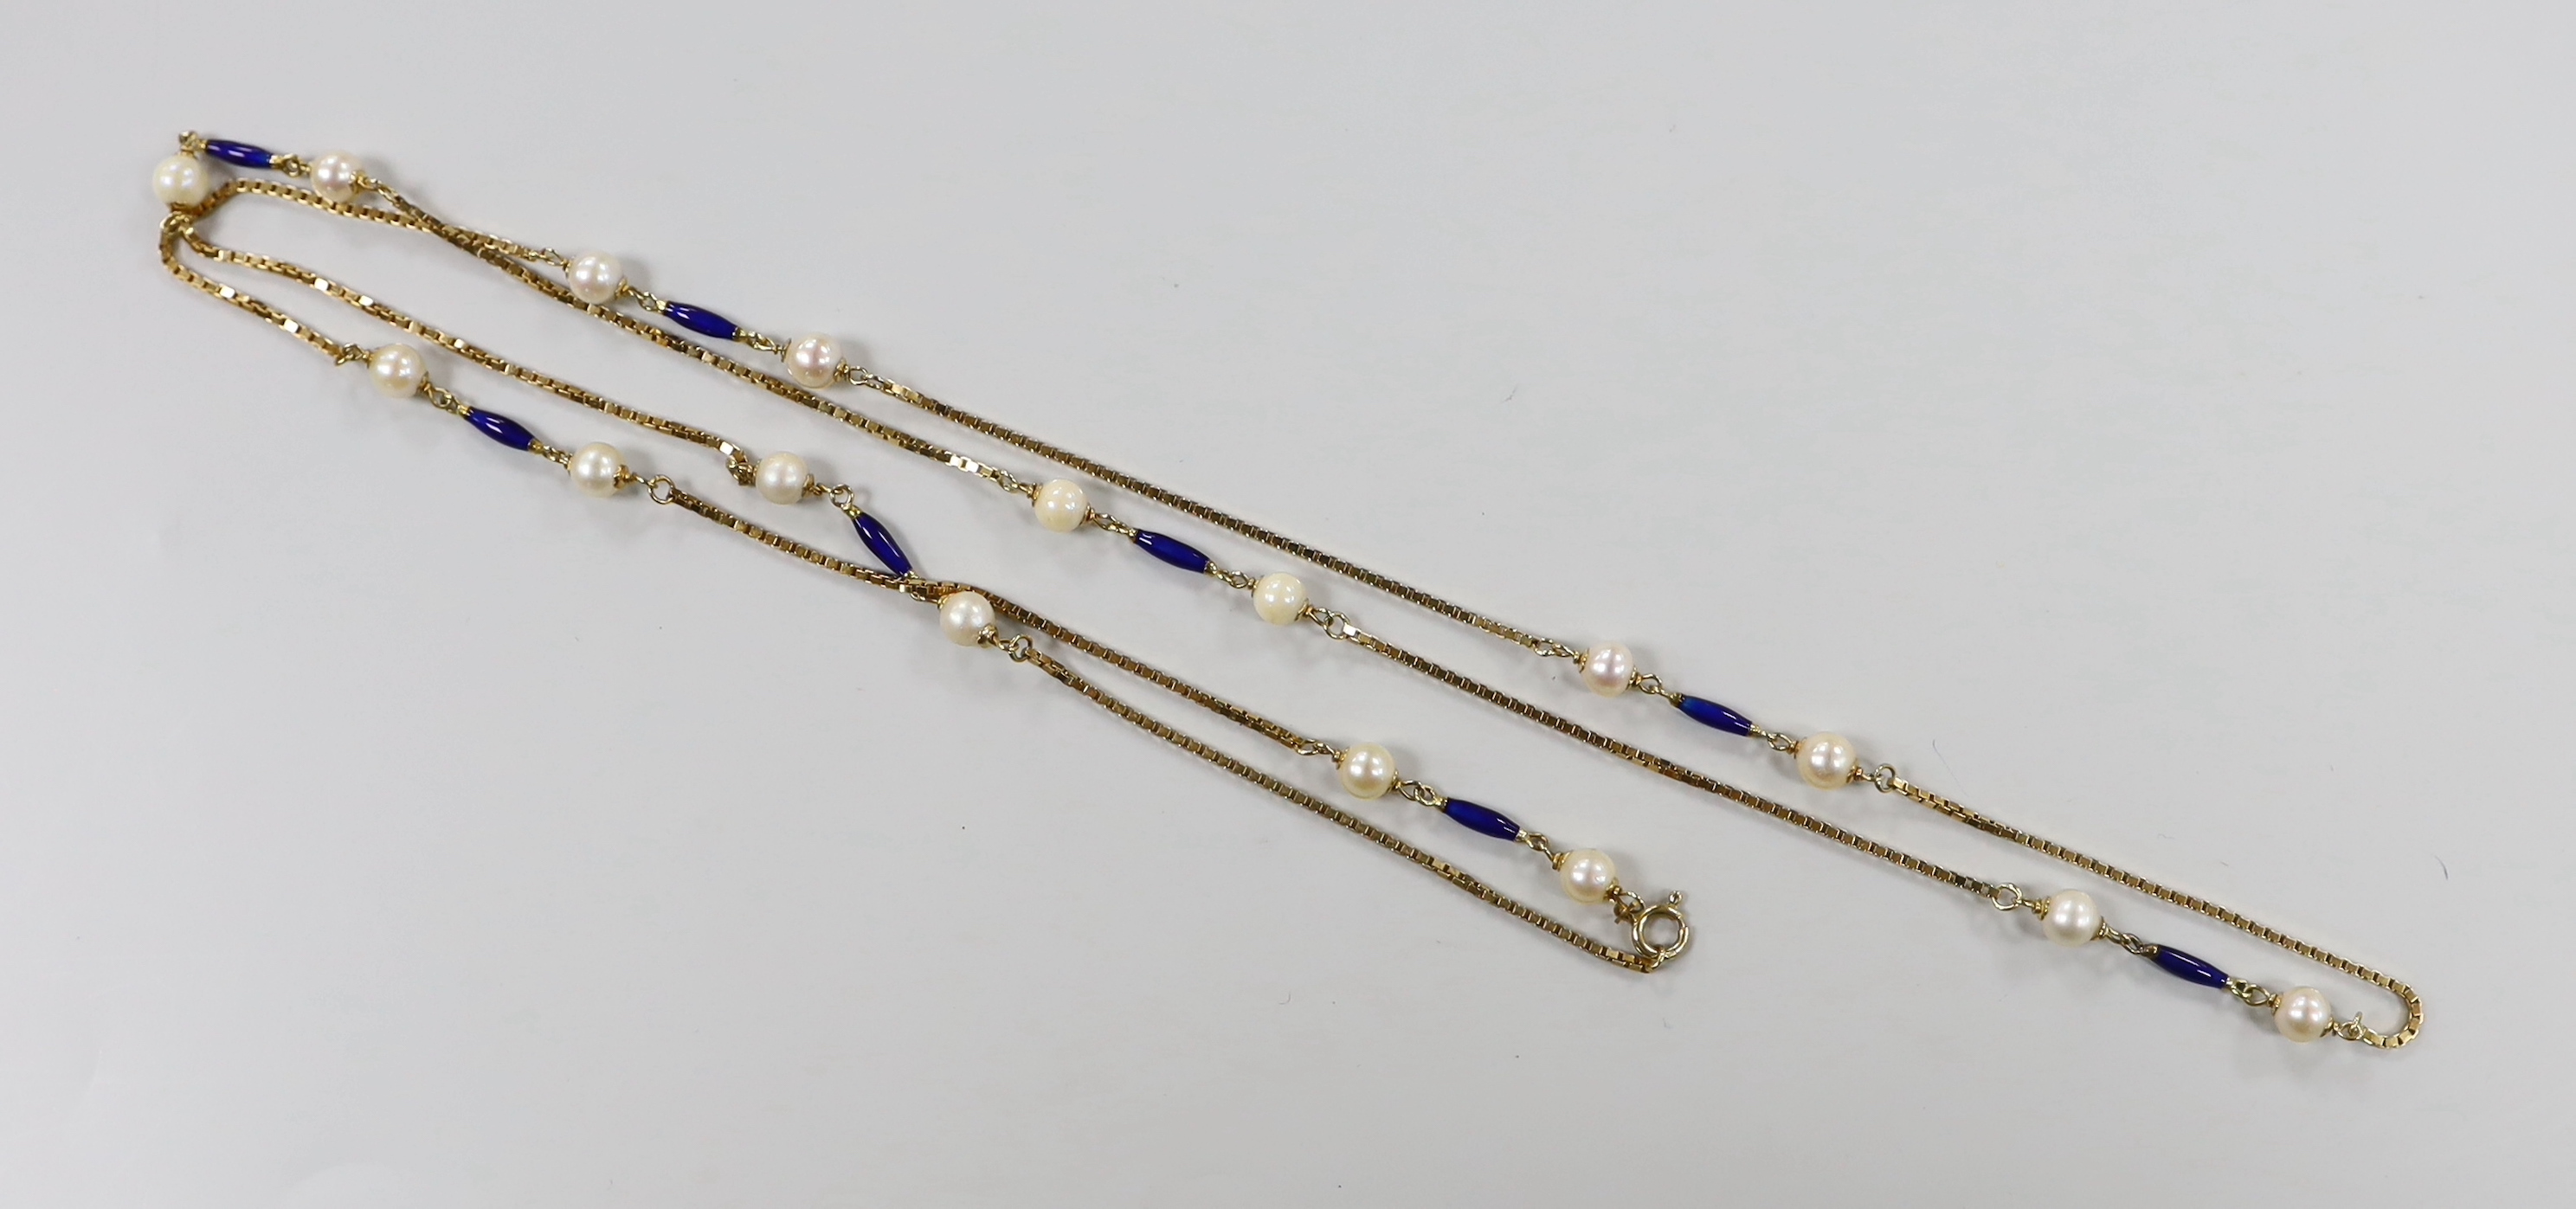 A mid to late 20th century Italian Uno-A-Erre 750 yellow metal, cultured pearl and blue enamelled baton link necklace, 94cm, gross weight 23.5 grams.